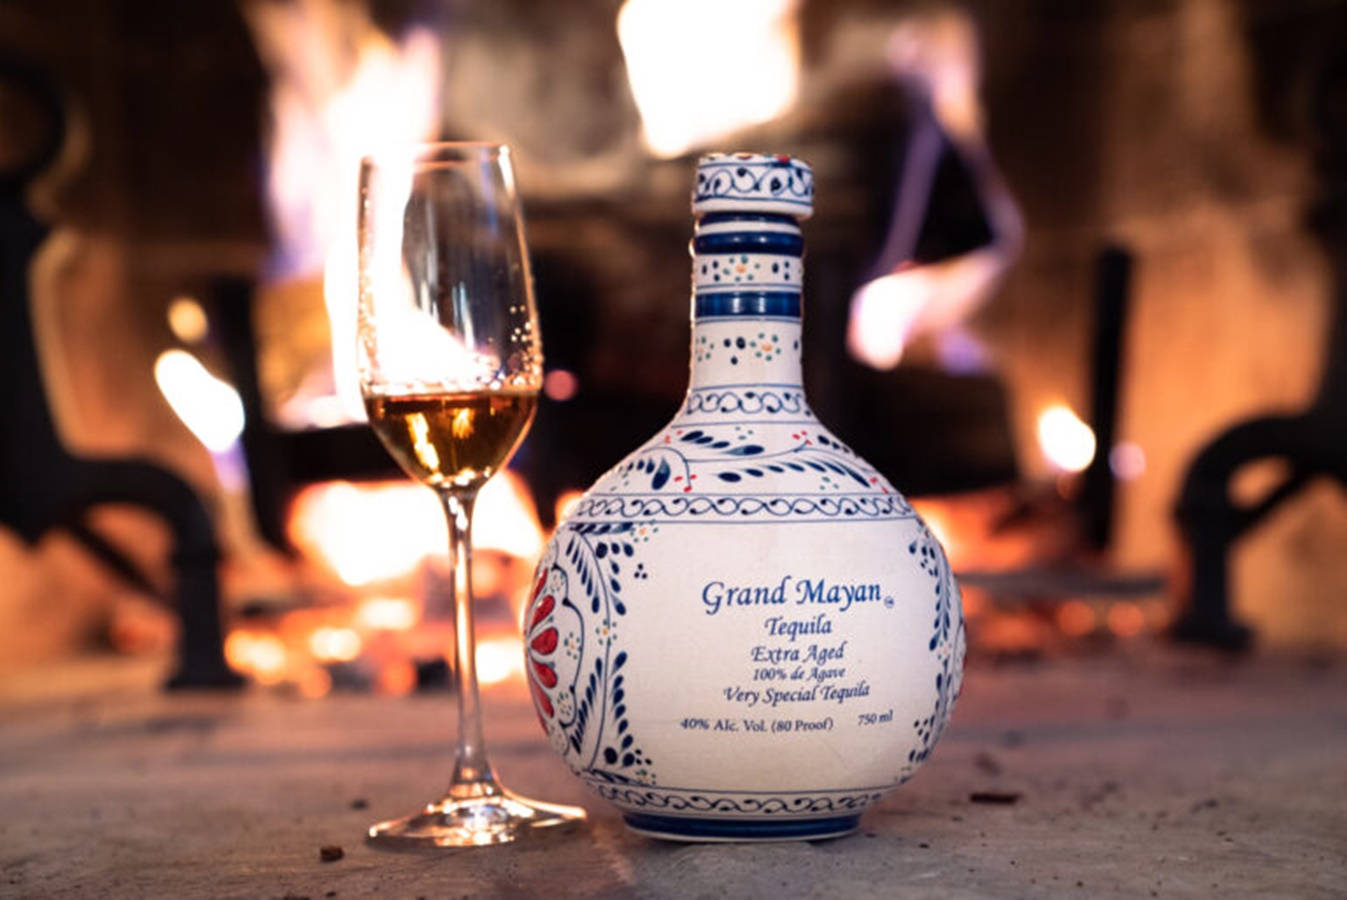 Grand Mayan Silver Tequila Bottle Fireplace Photography Picture